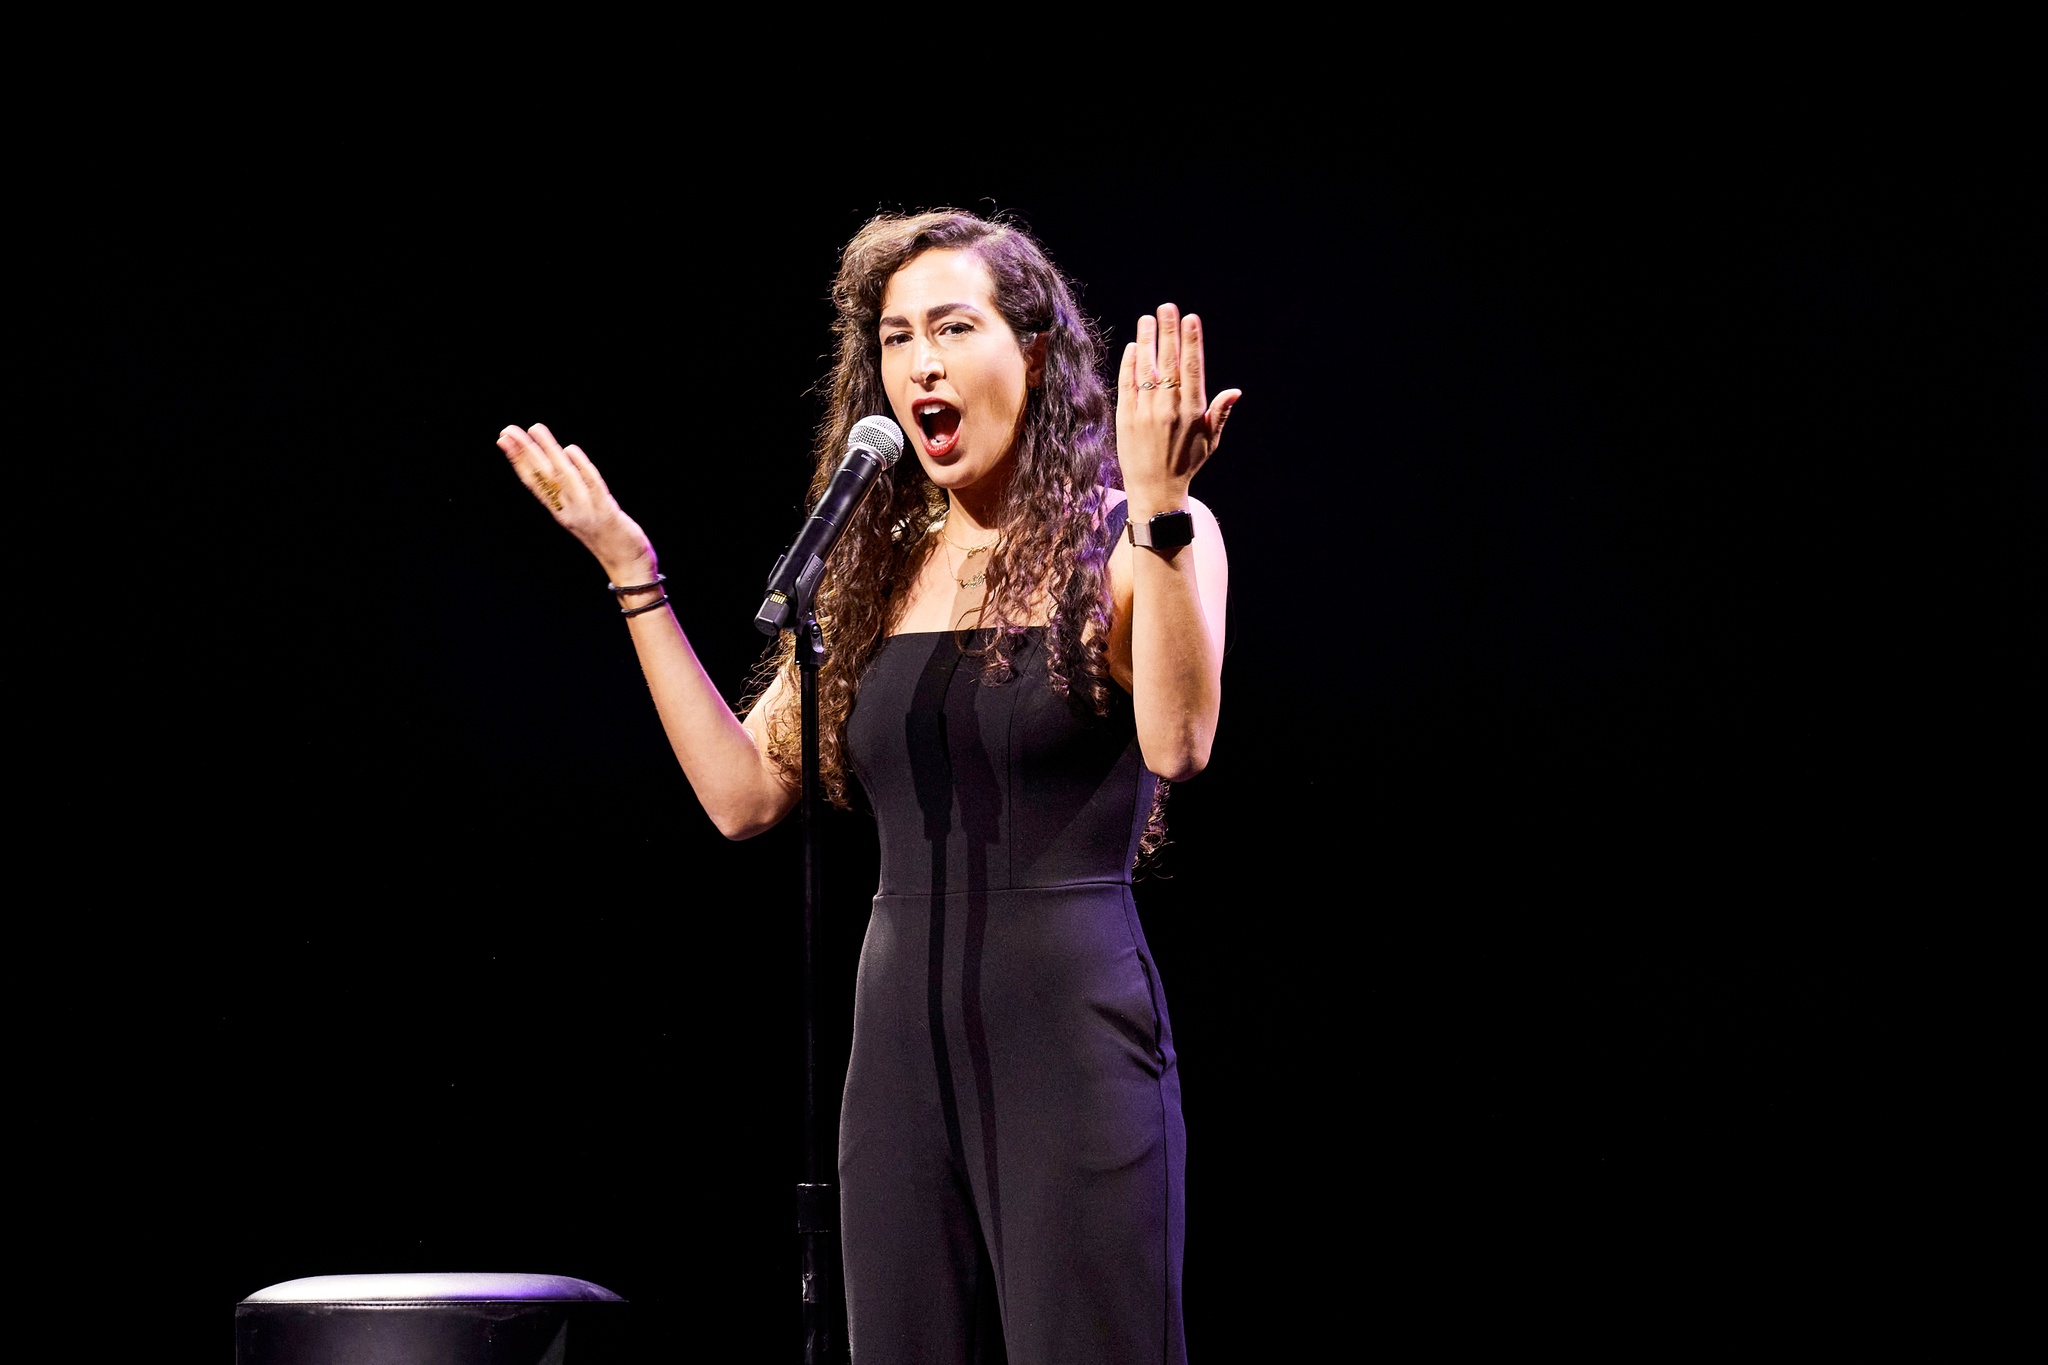 A woman with long brown hair in loose curls holds her hands up in front of her while speaking into a microphone.